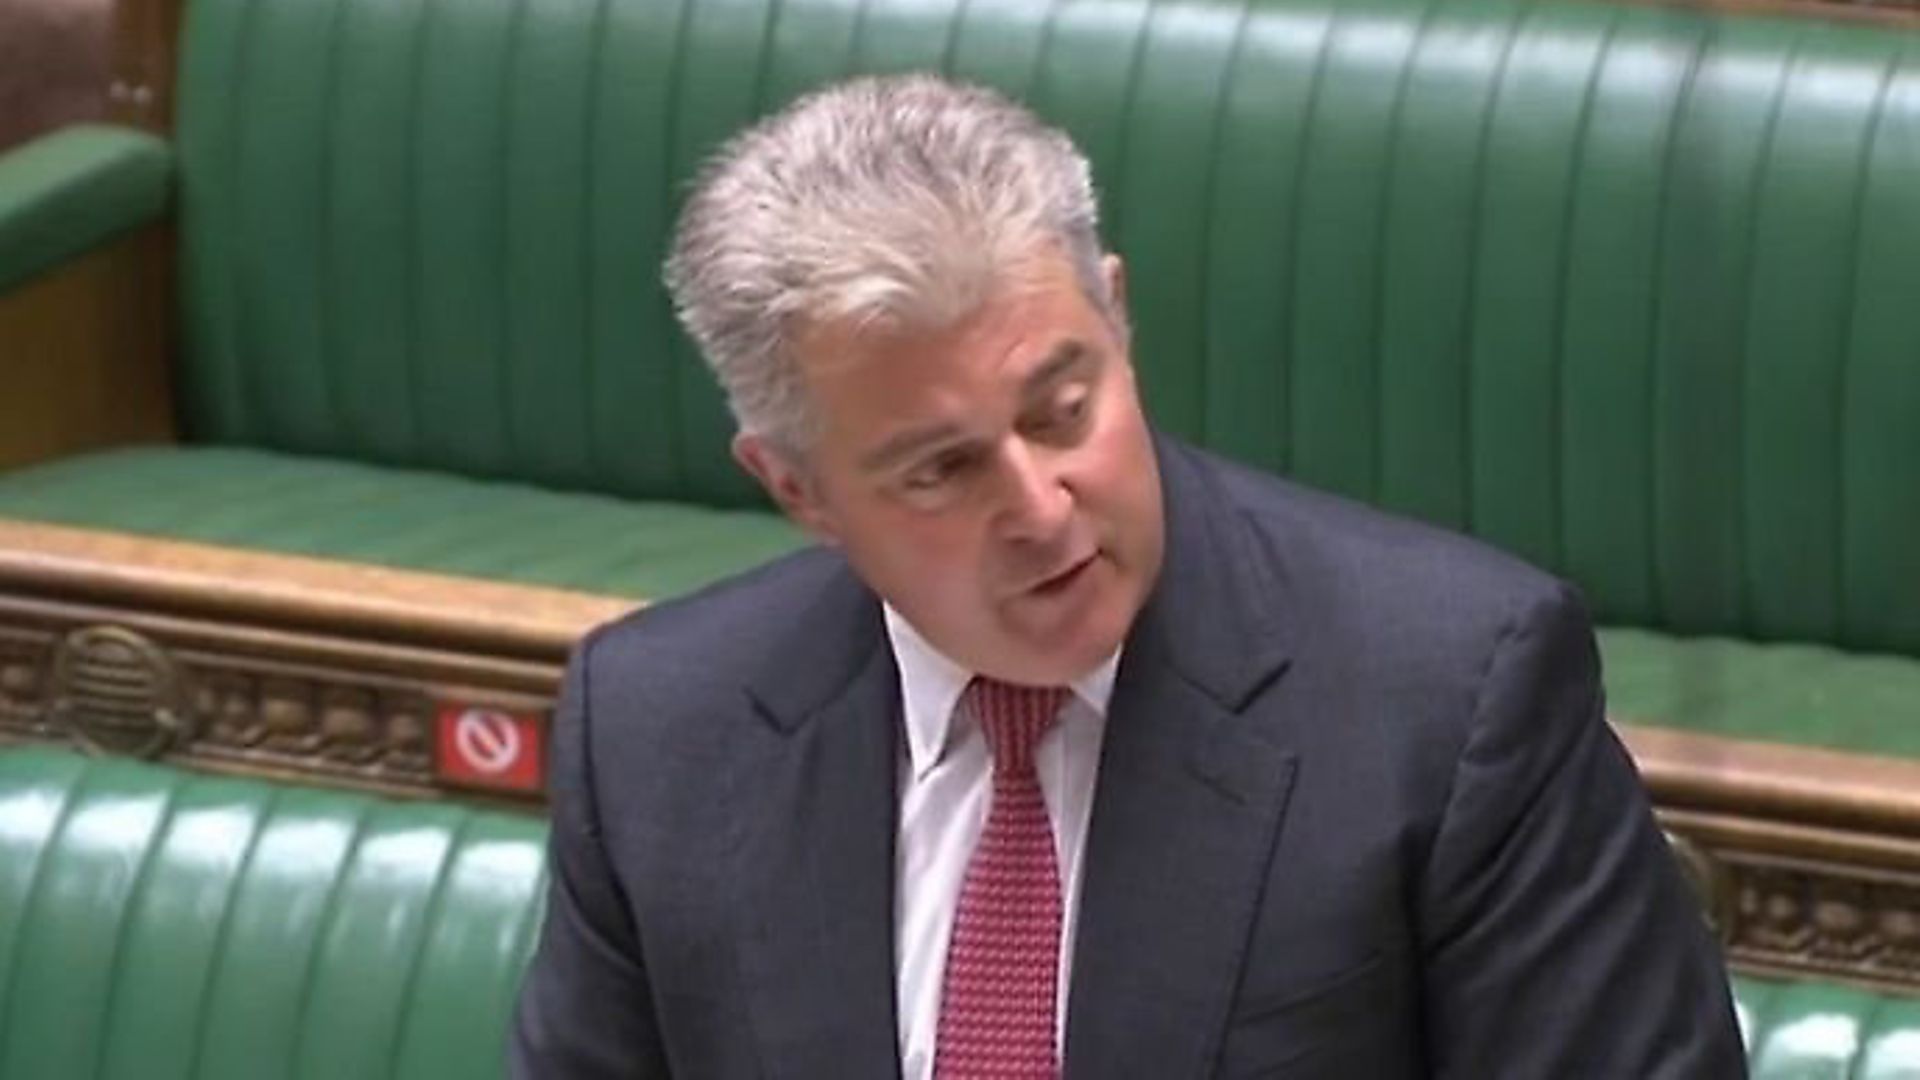 Northern Ireland secretary Brandon Lewis answers questions on the Northern Ireland protocol. Photograph: Parliament TV. - Credit: Archant